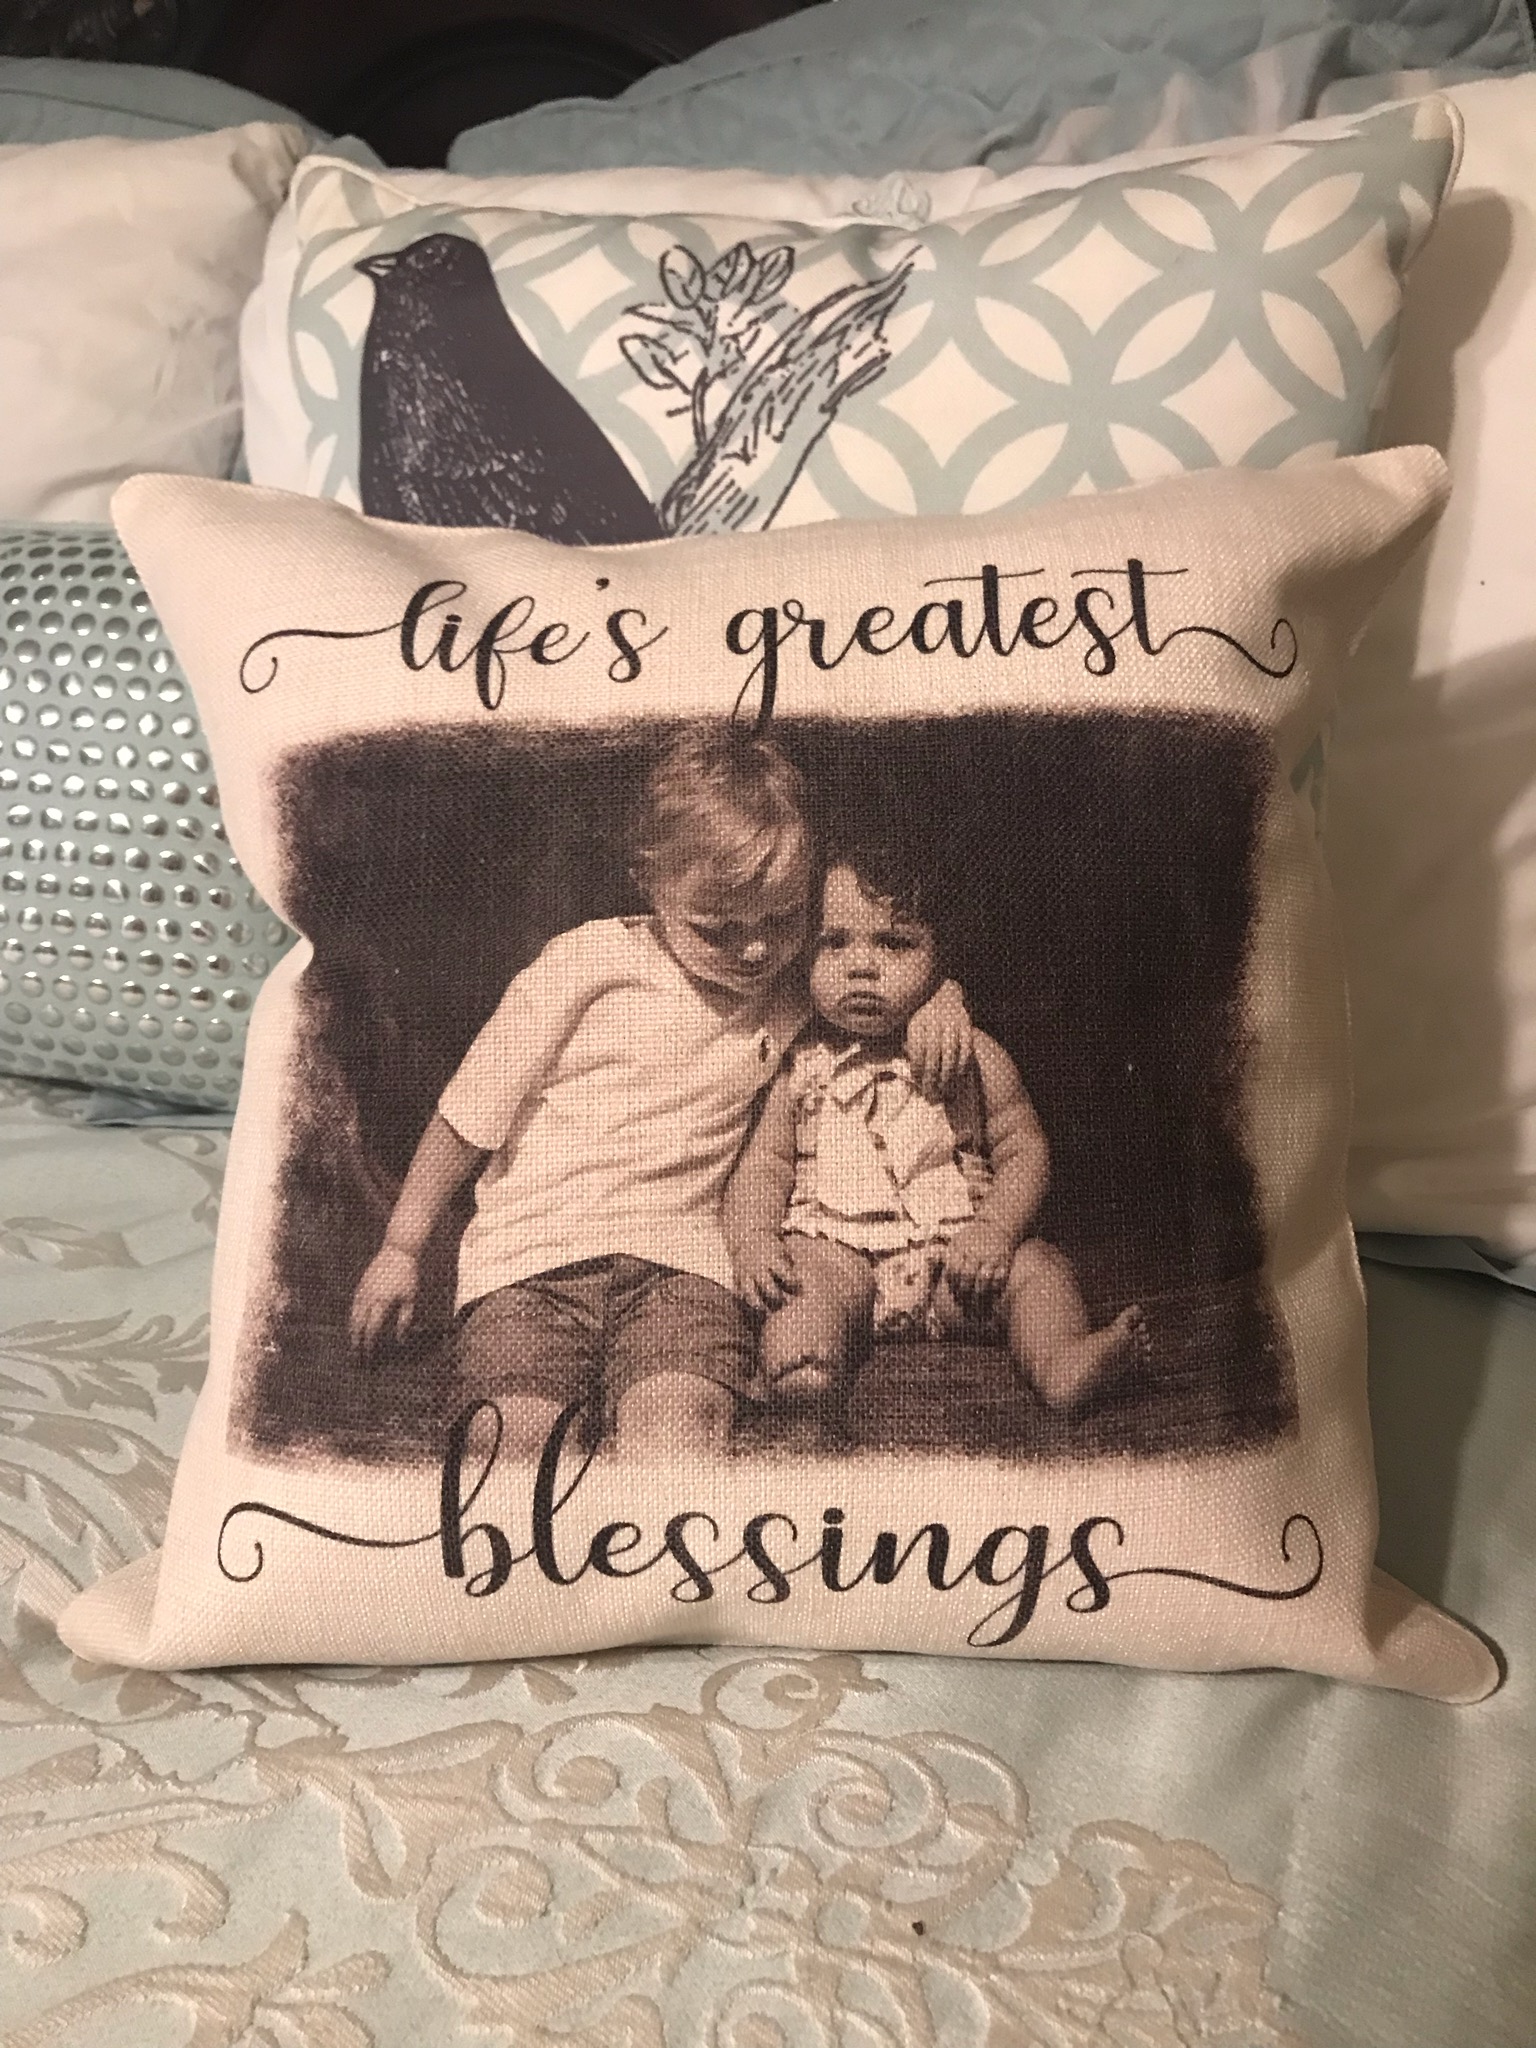 Personalized pillows 